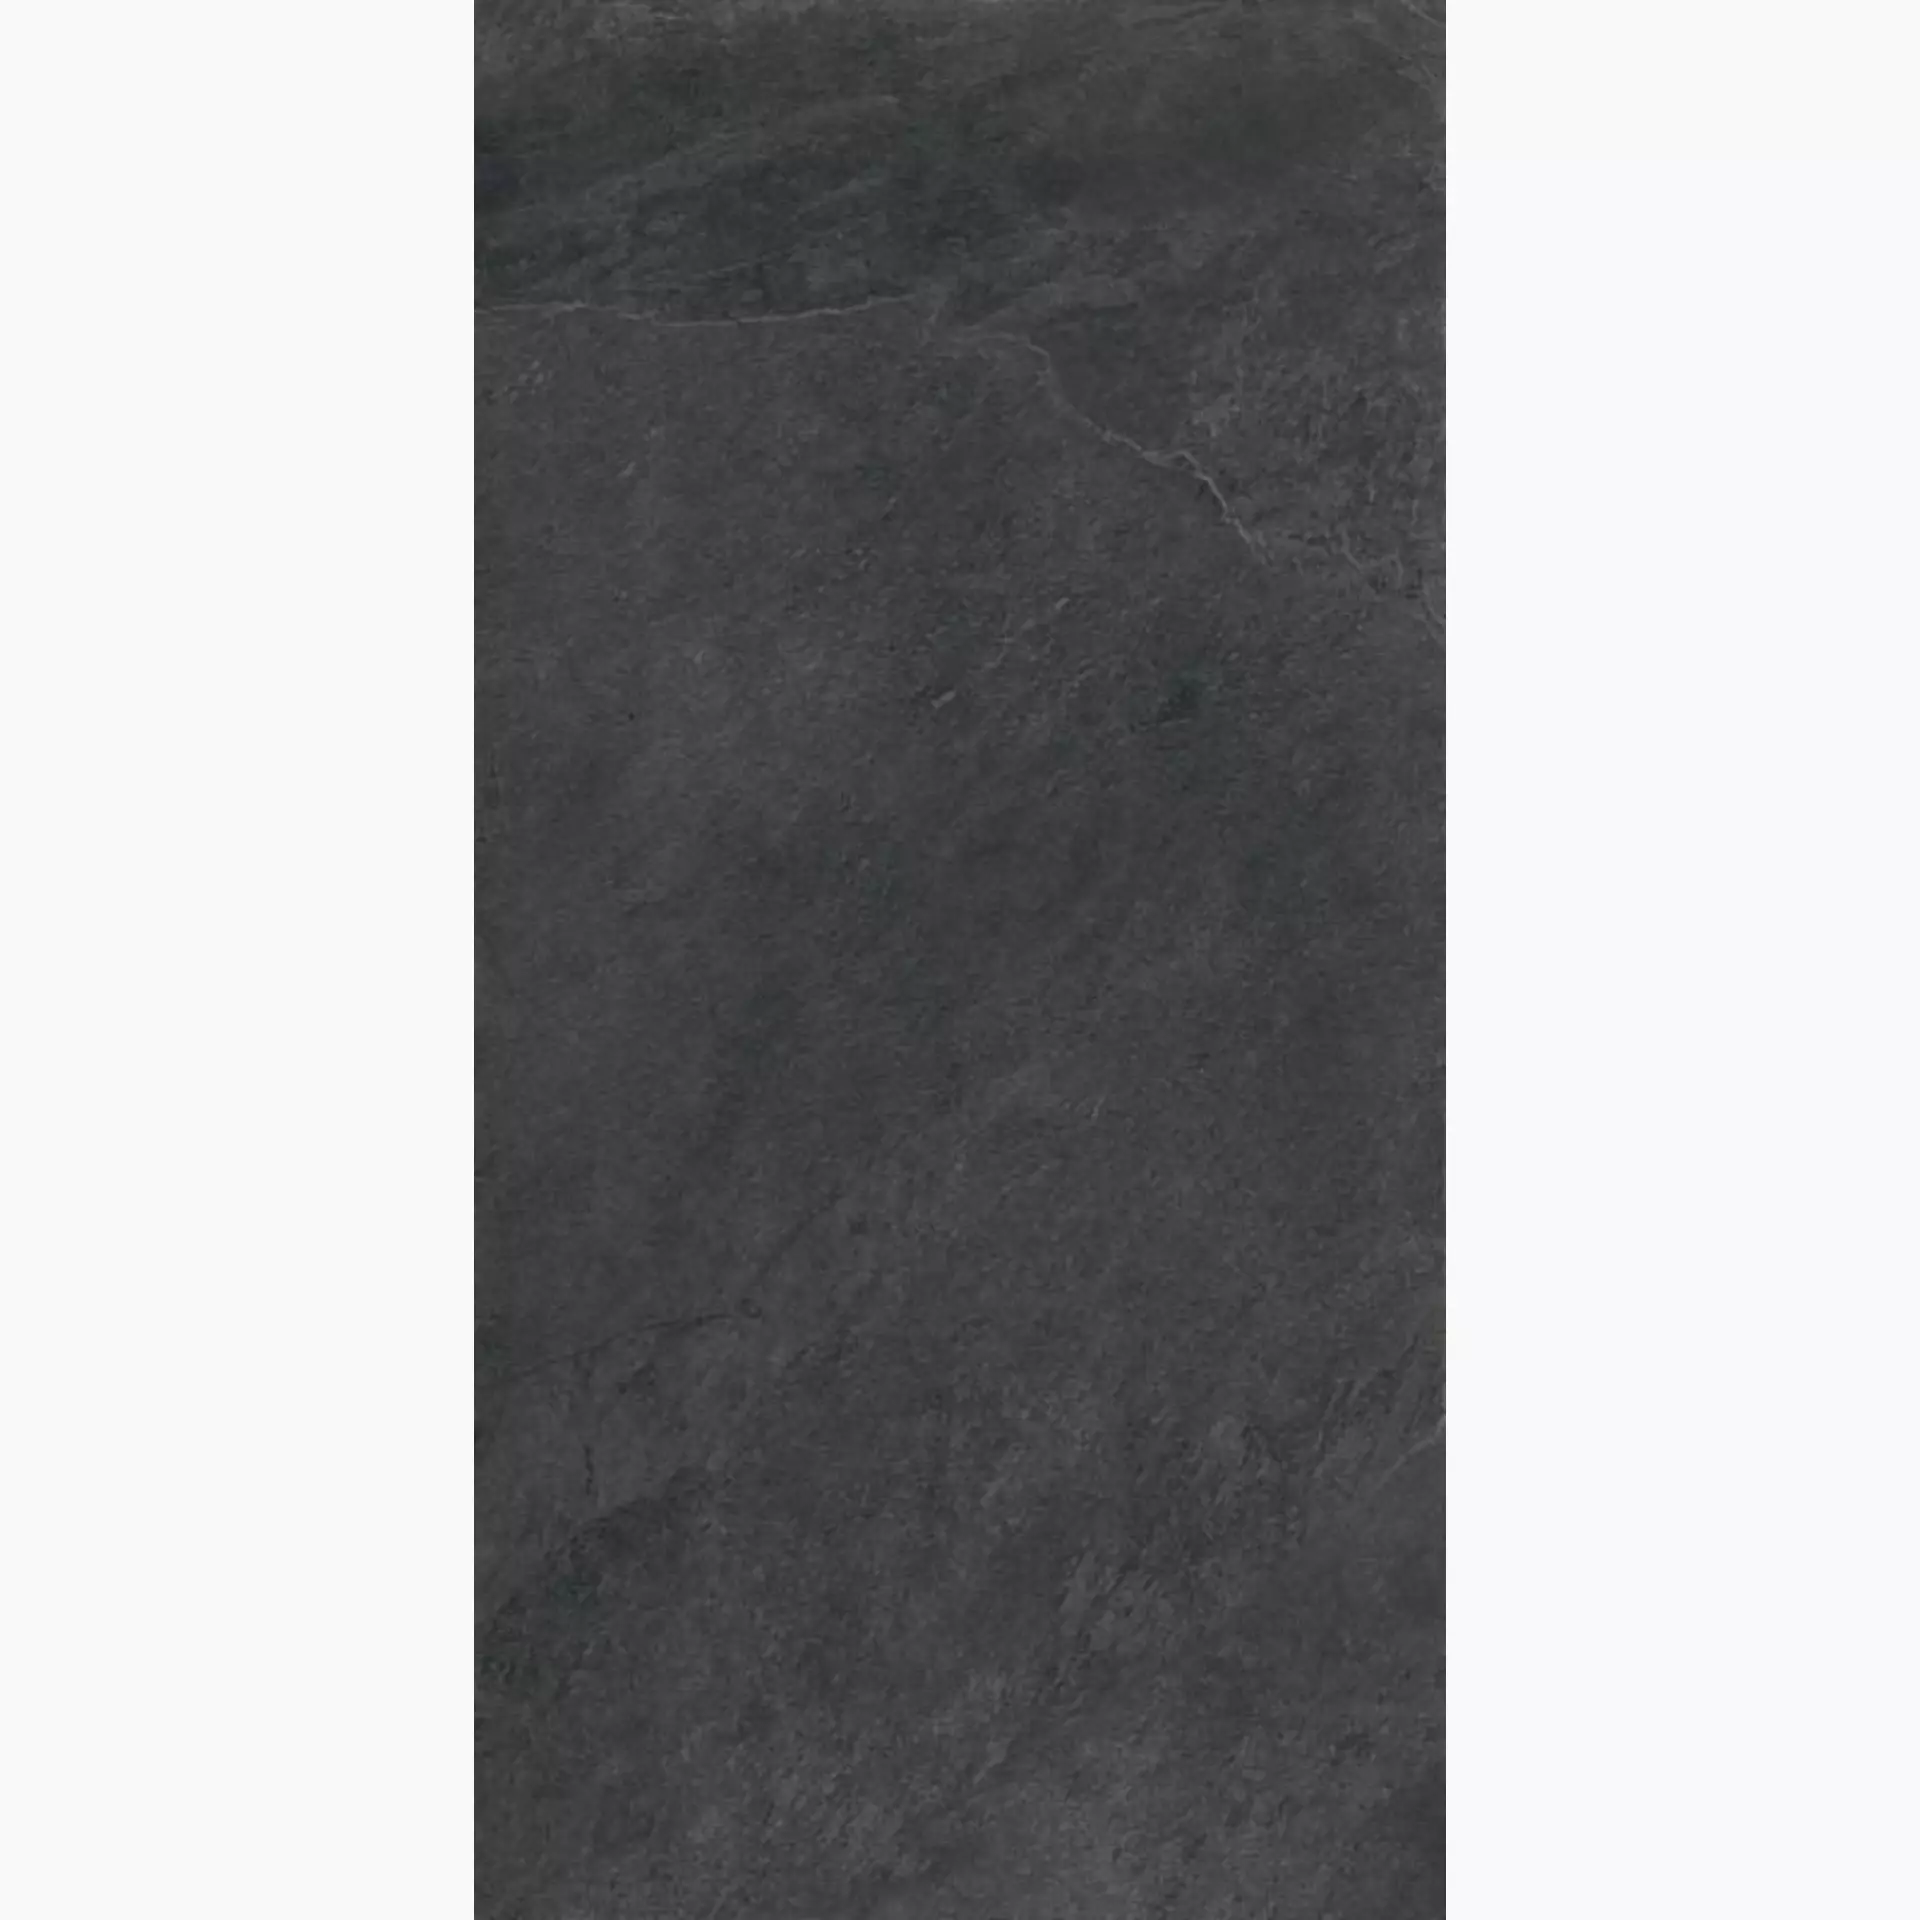 Sant Agostino Unionstone Mustang Natural CSAMSTNG12 60x120cm rectified 10mm